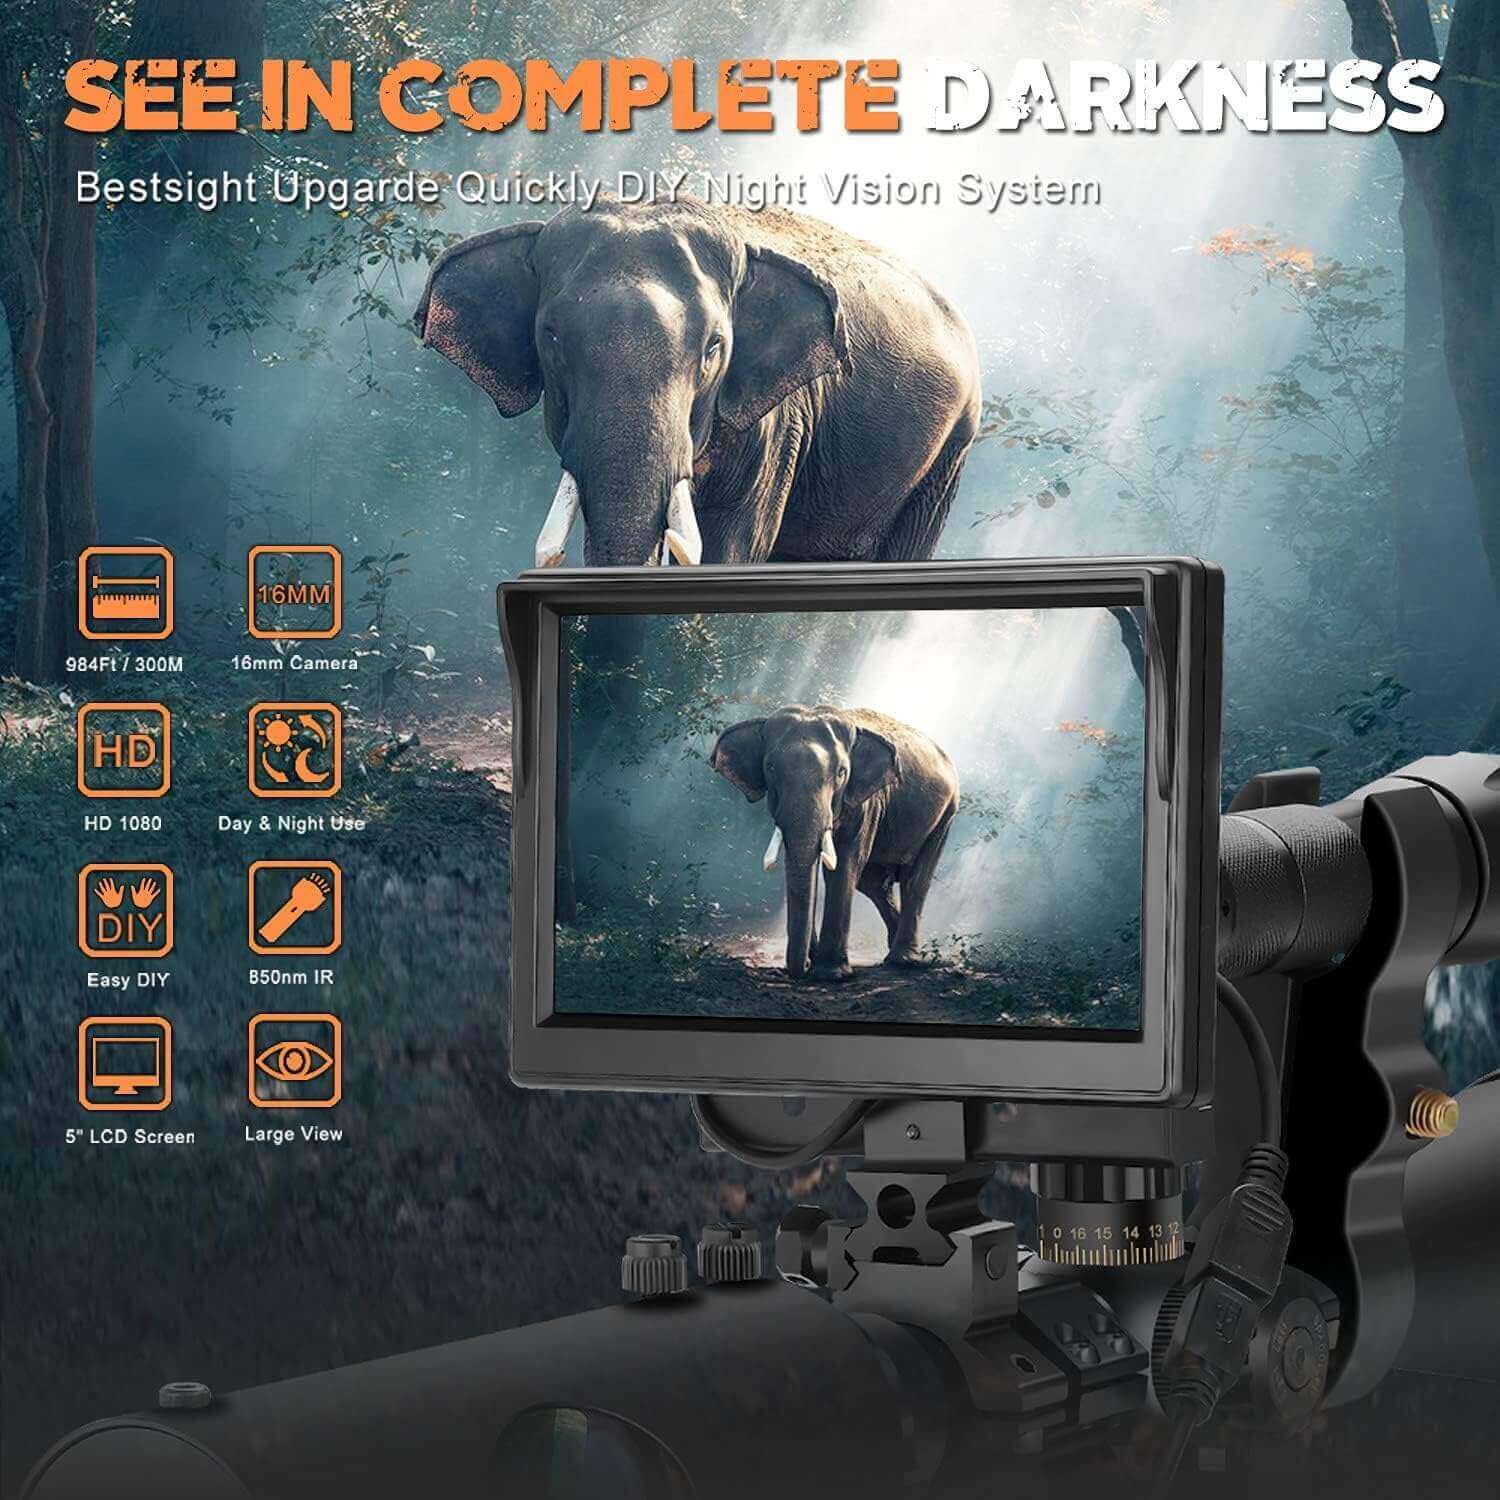 BESTSIGHT Night Vision Scope Detail Features